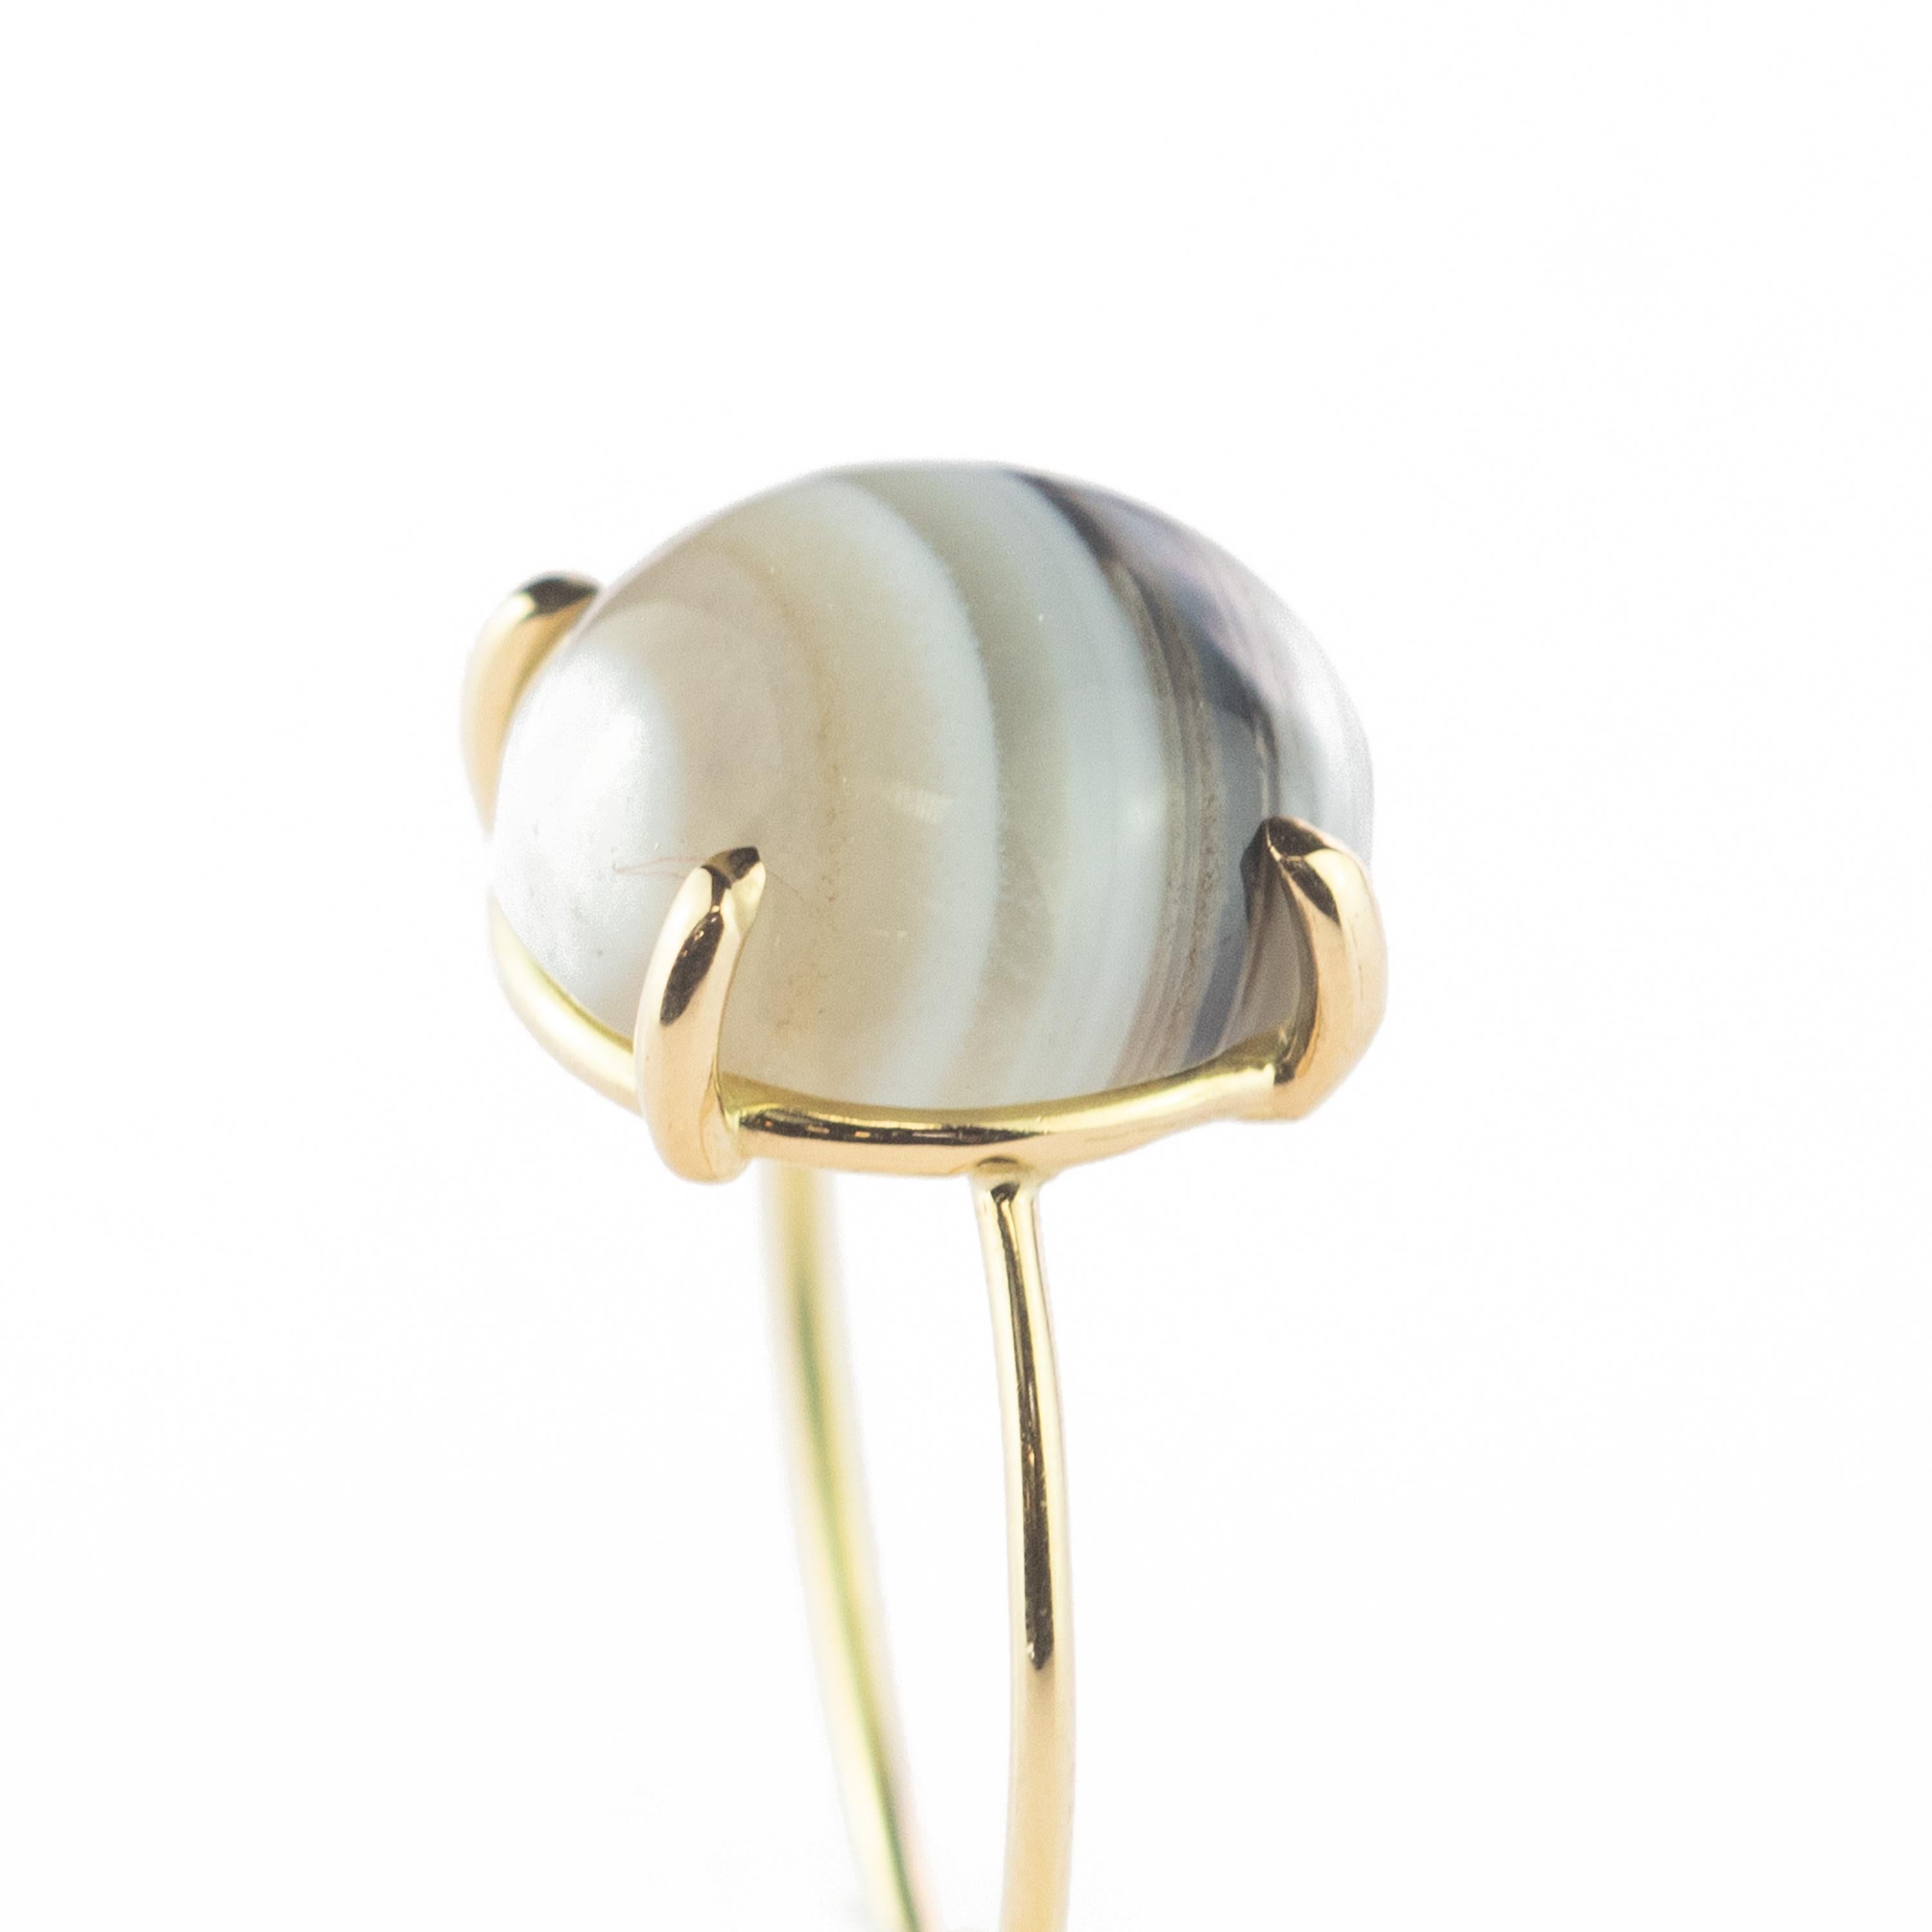 This extraordinary agate (5.5 carats) ring. All artfully set and crafted in 18k yellow gold to create this stunning piece of jewelry. This artwork is for a fresh, young and modern woman.

Agate is an excellent stone for rebalancing and harmonising